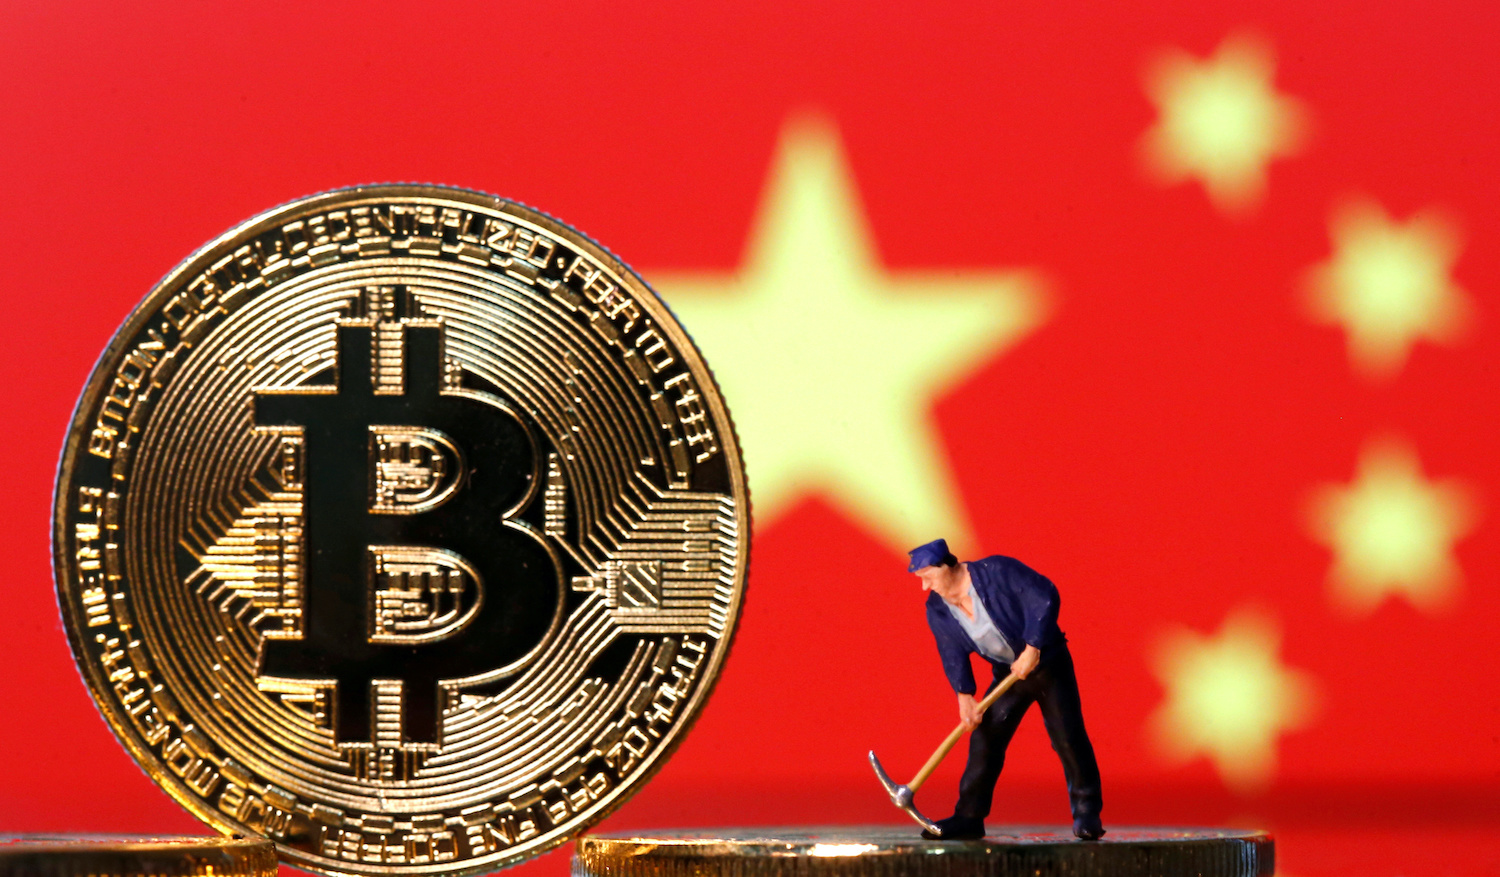 Bruised by stock market, Chinese rush into banned bitcoin | Reuters